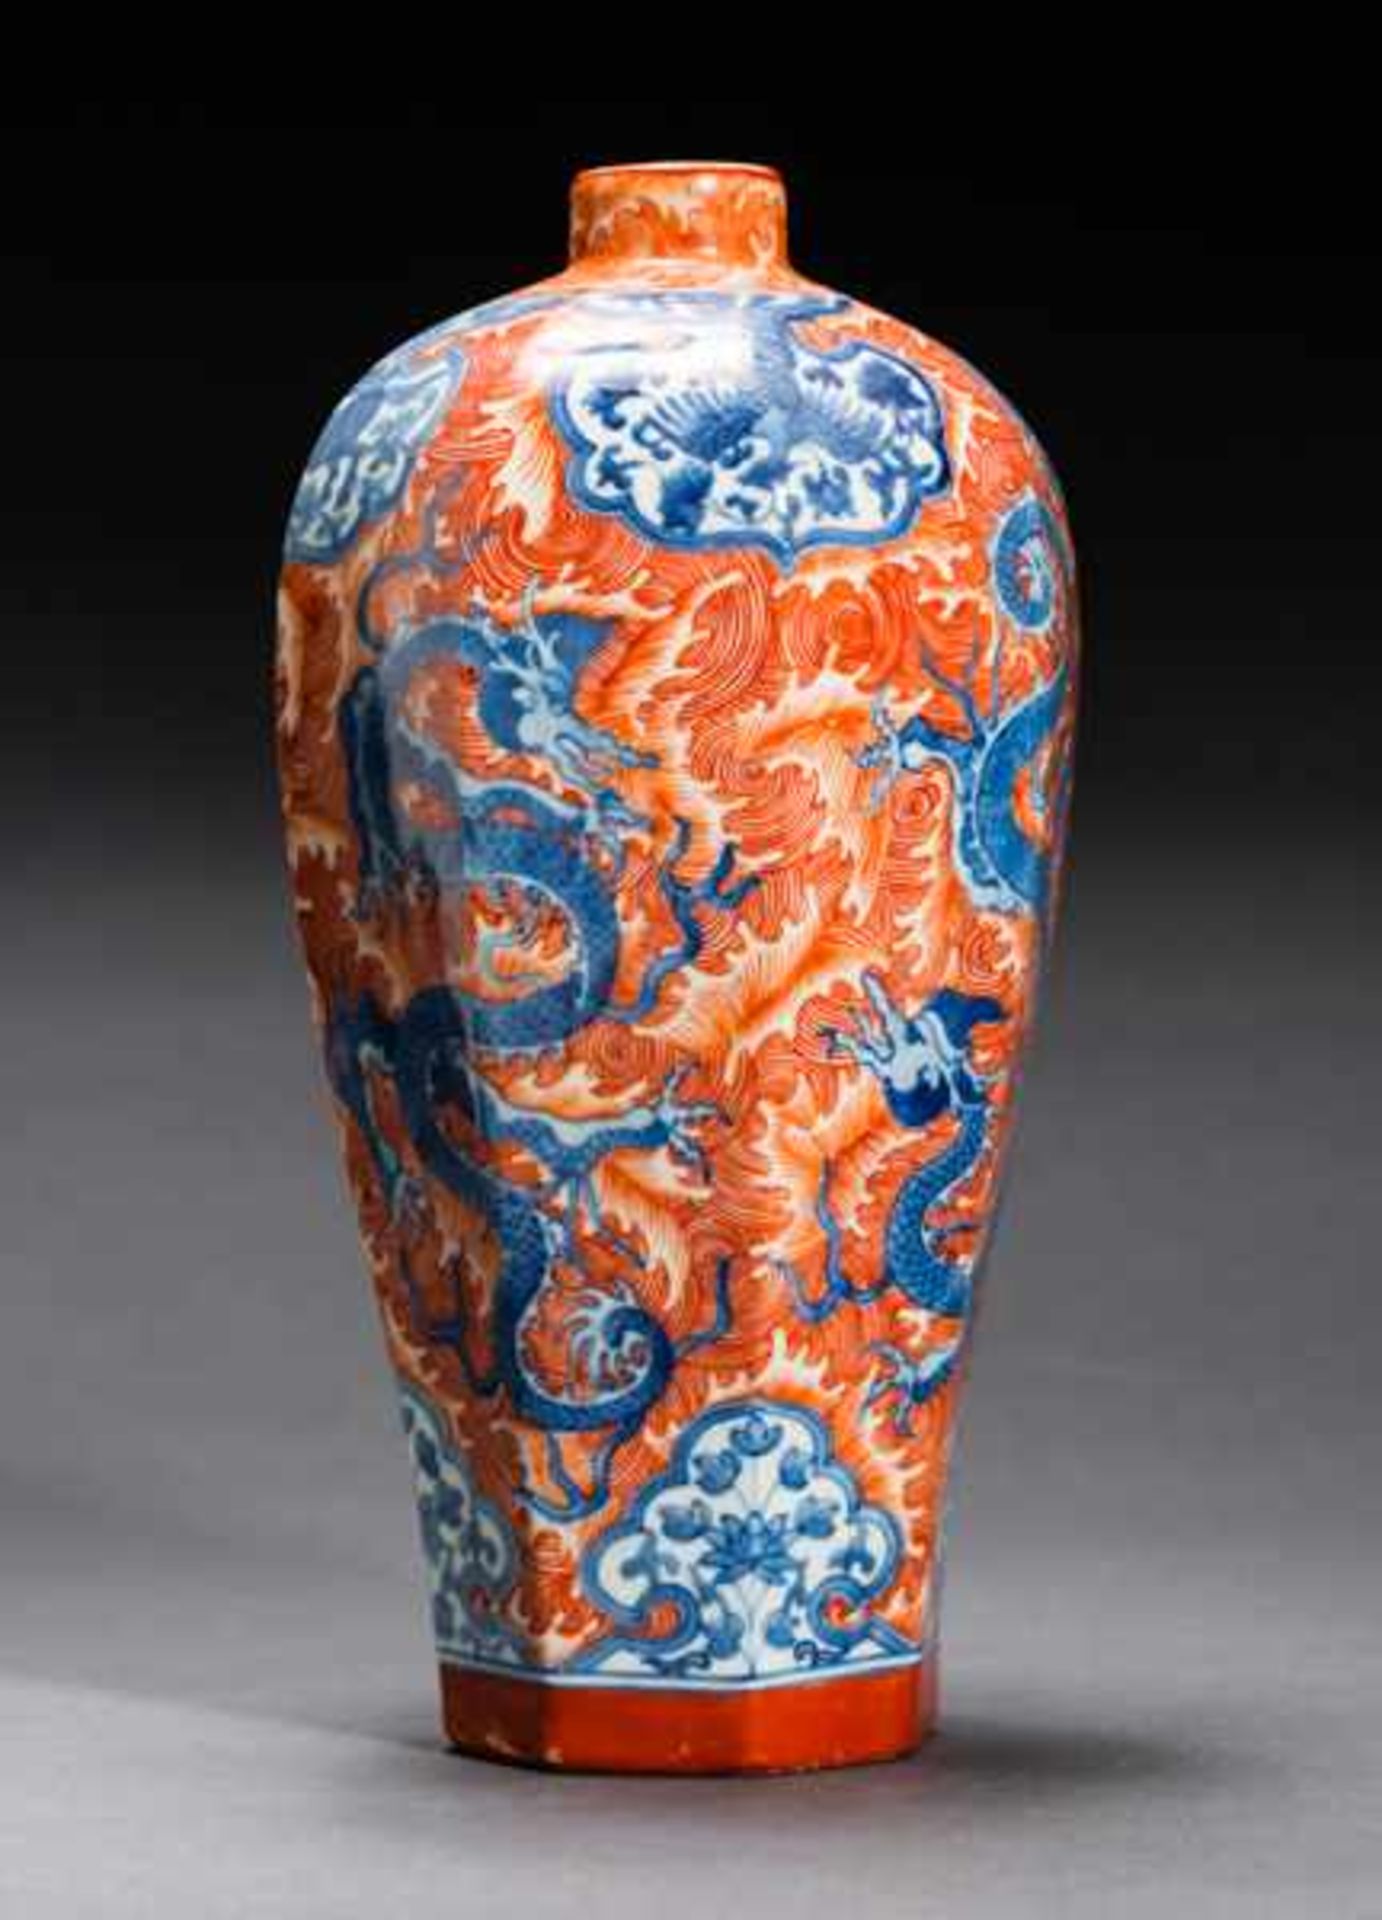 MEIPING VASE WITH DRAGONS Porcelain, white-blue and iron red. China, Angular, octagonal Meiping form